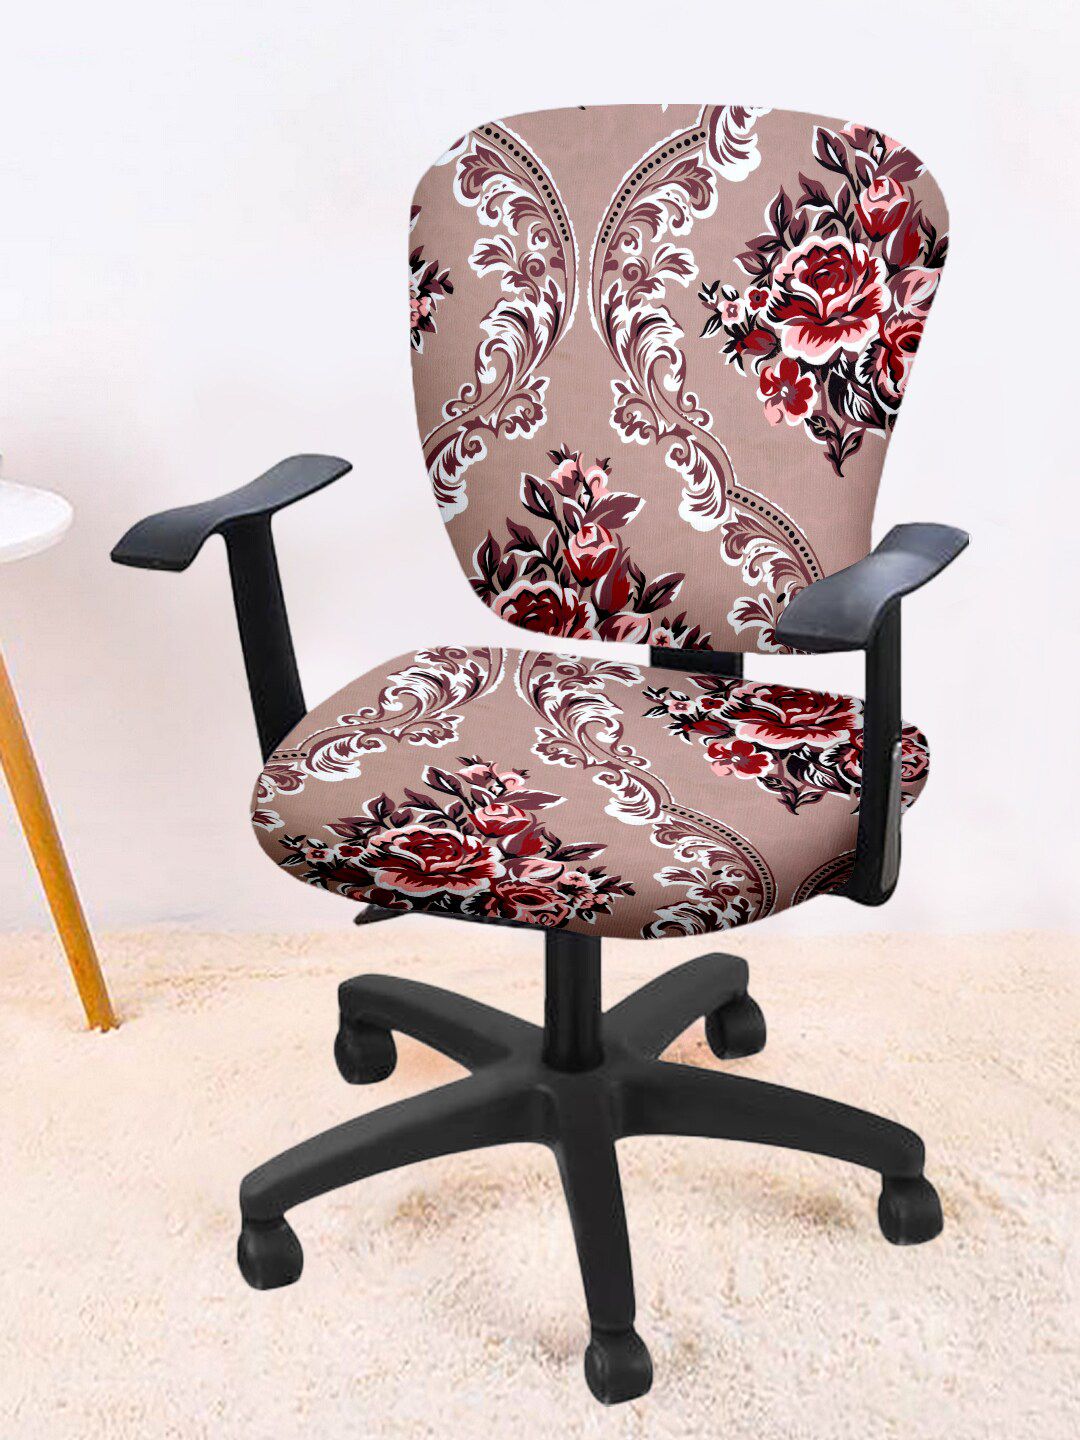 Cortina Set Of 8 Beige & Maroon Floral Print Chair Covers Price in India